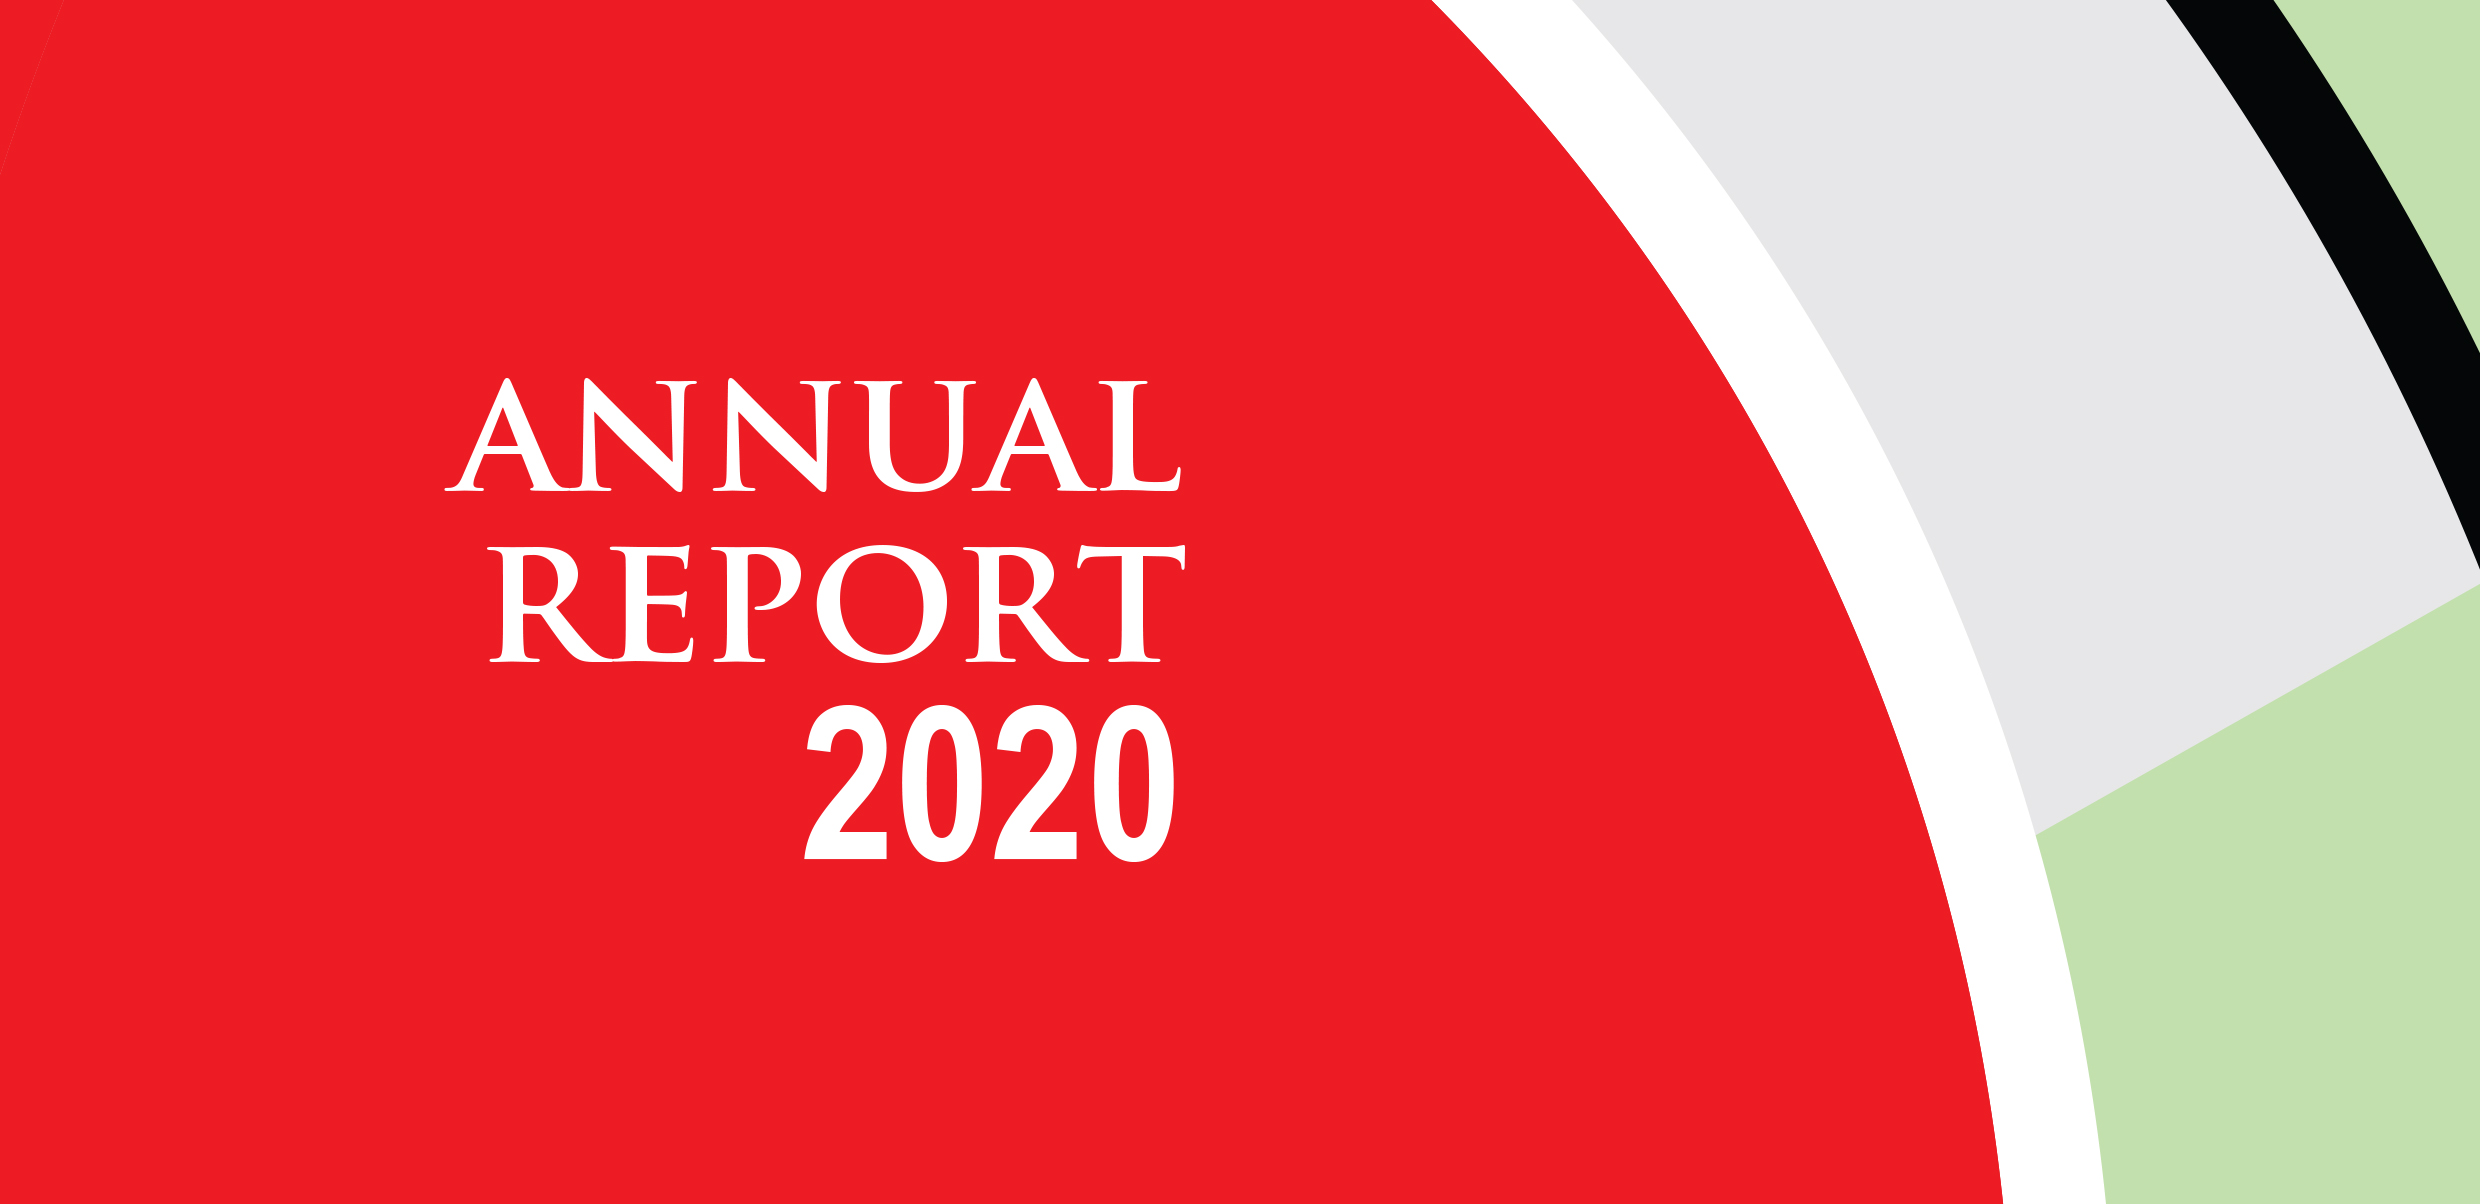 Read our Annual Report 2020!